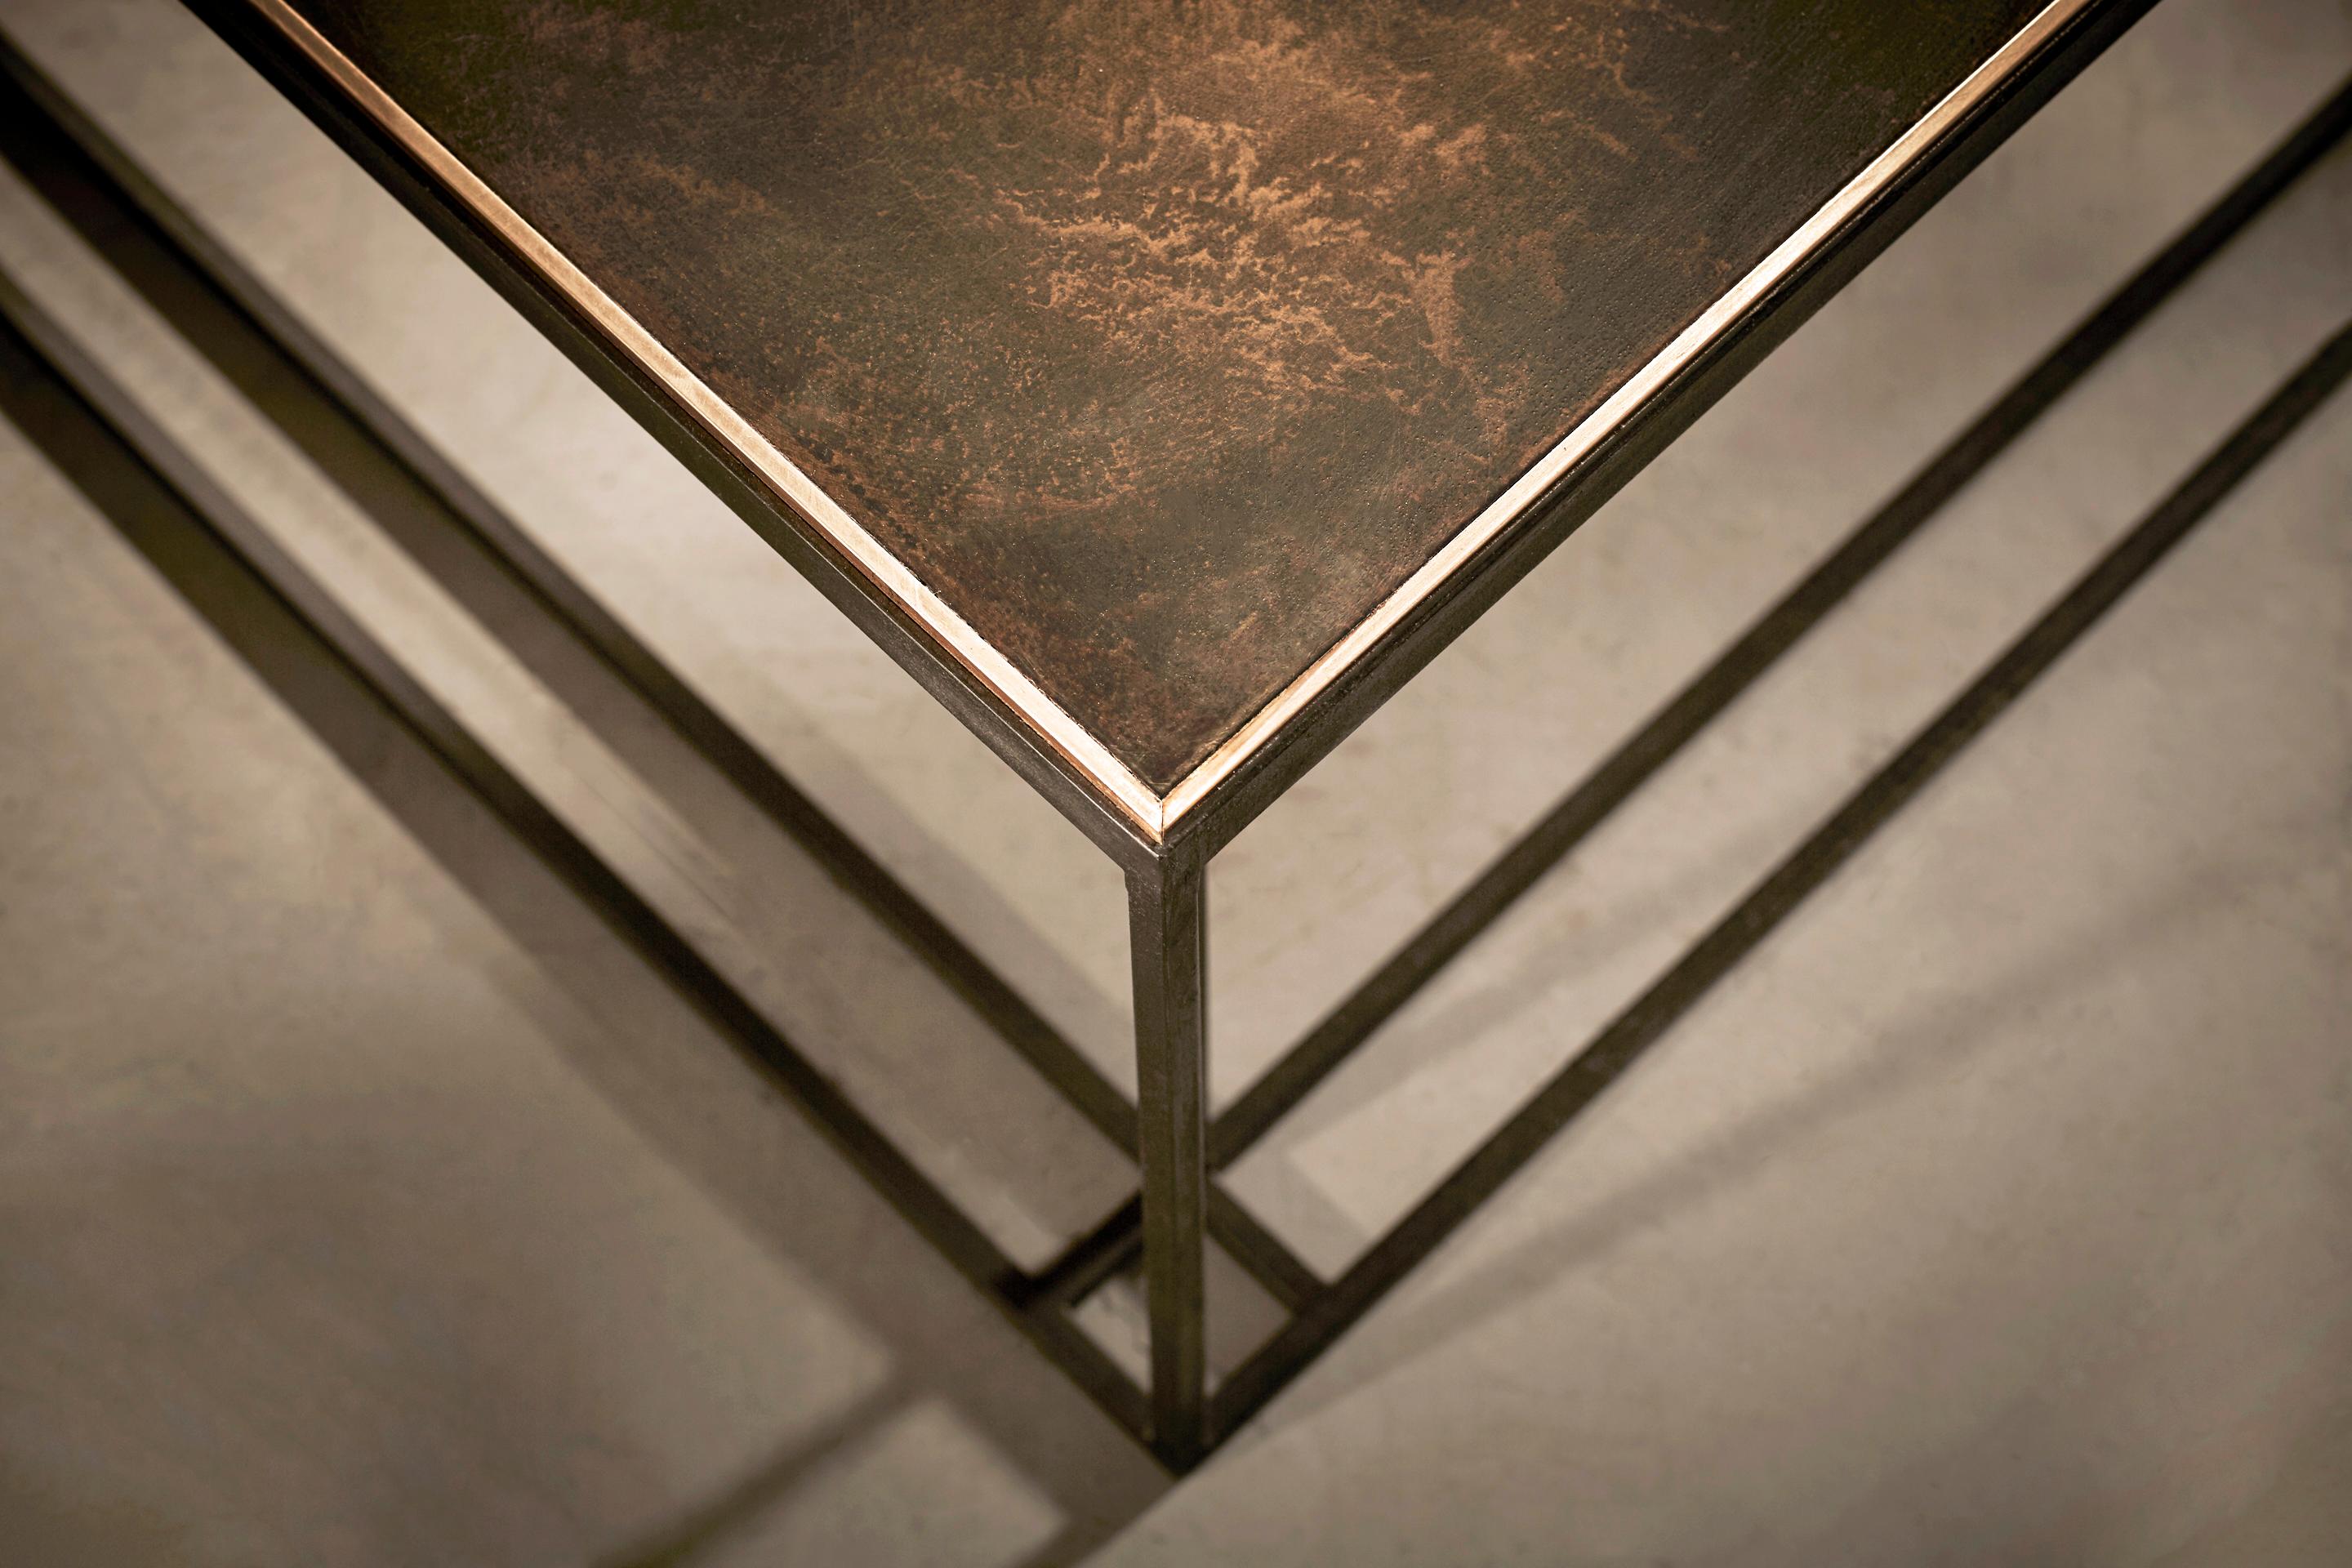 Brass and steel handcrafted coffee table and signed by Novocastrian
Materials: Patinated brass, blackened steel
Measures: 90cm (length) x 60cm (width) x 35cm (height).
Custom sizes available.

Novocastrian

We are metalworkers, architects,